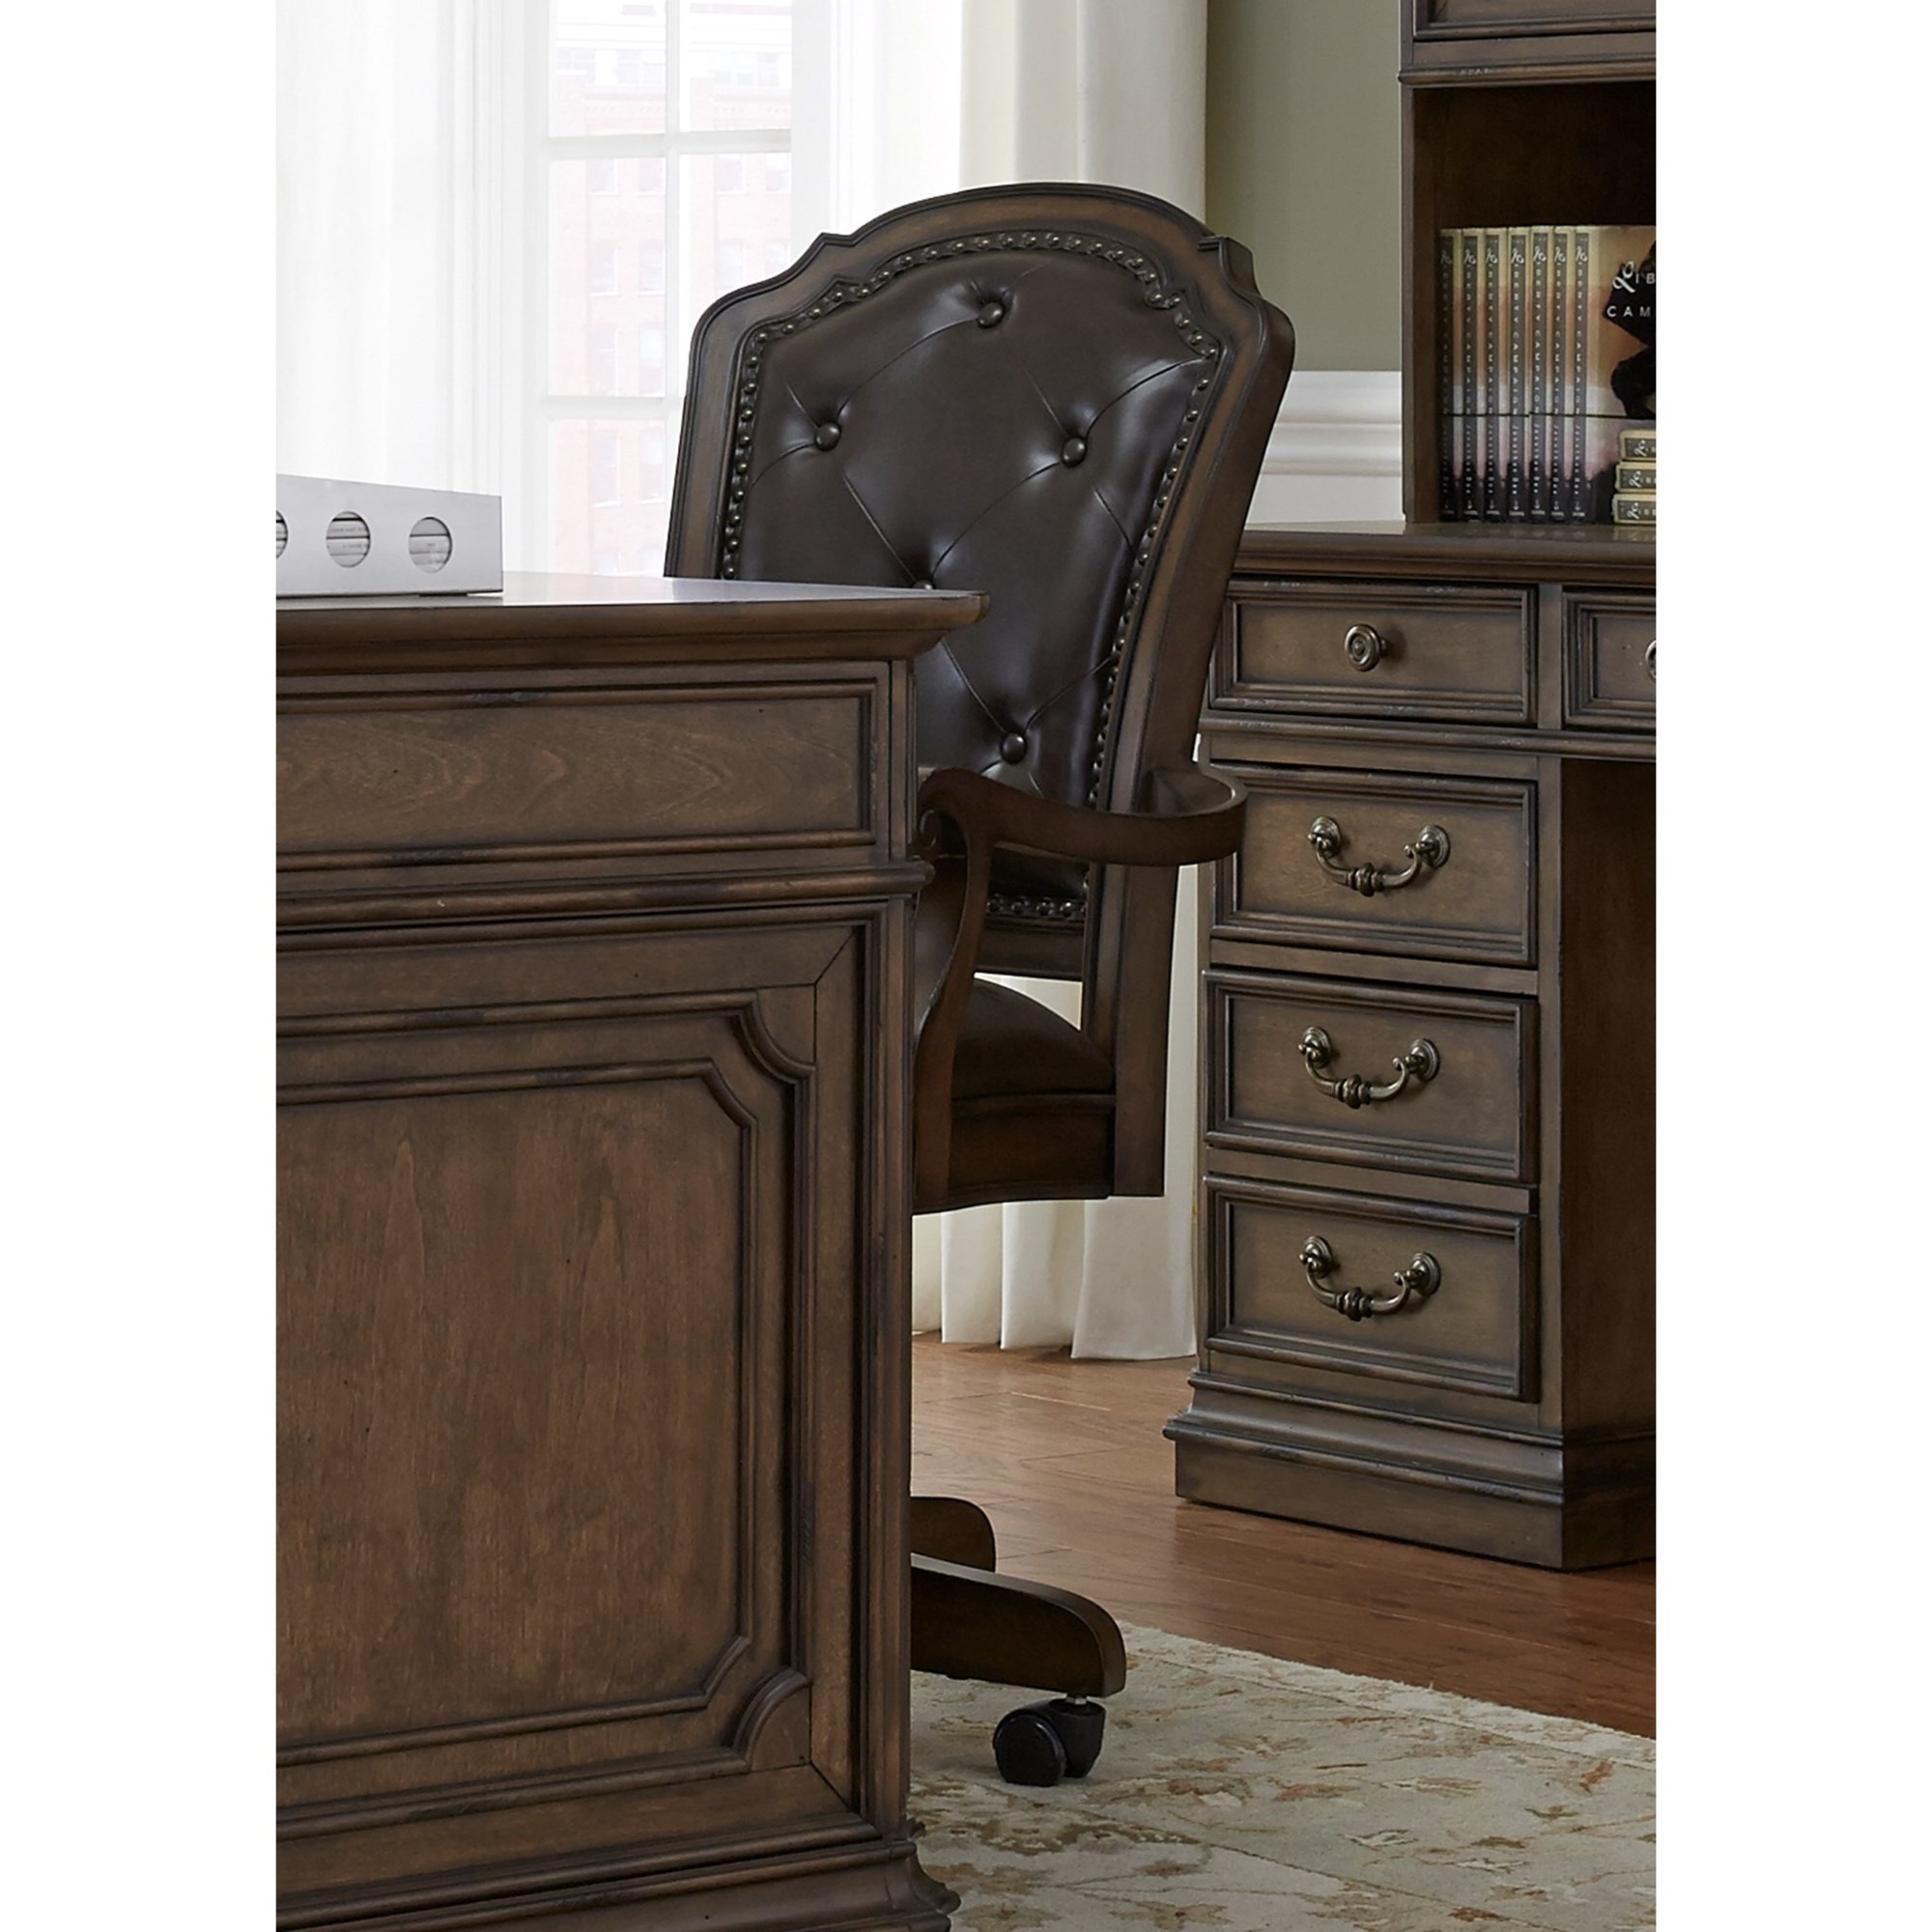 Home Office Furniture - Godby Home Furnishings - Noblesville, Carmel, Avon,  Indianapolis, Indiana Home Office Furniture Store